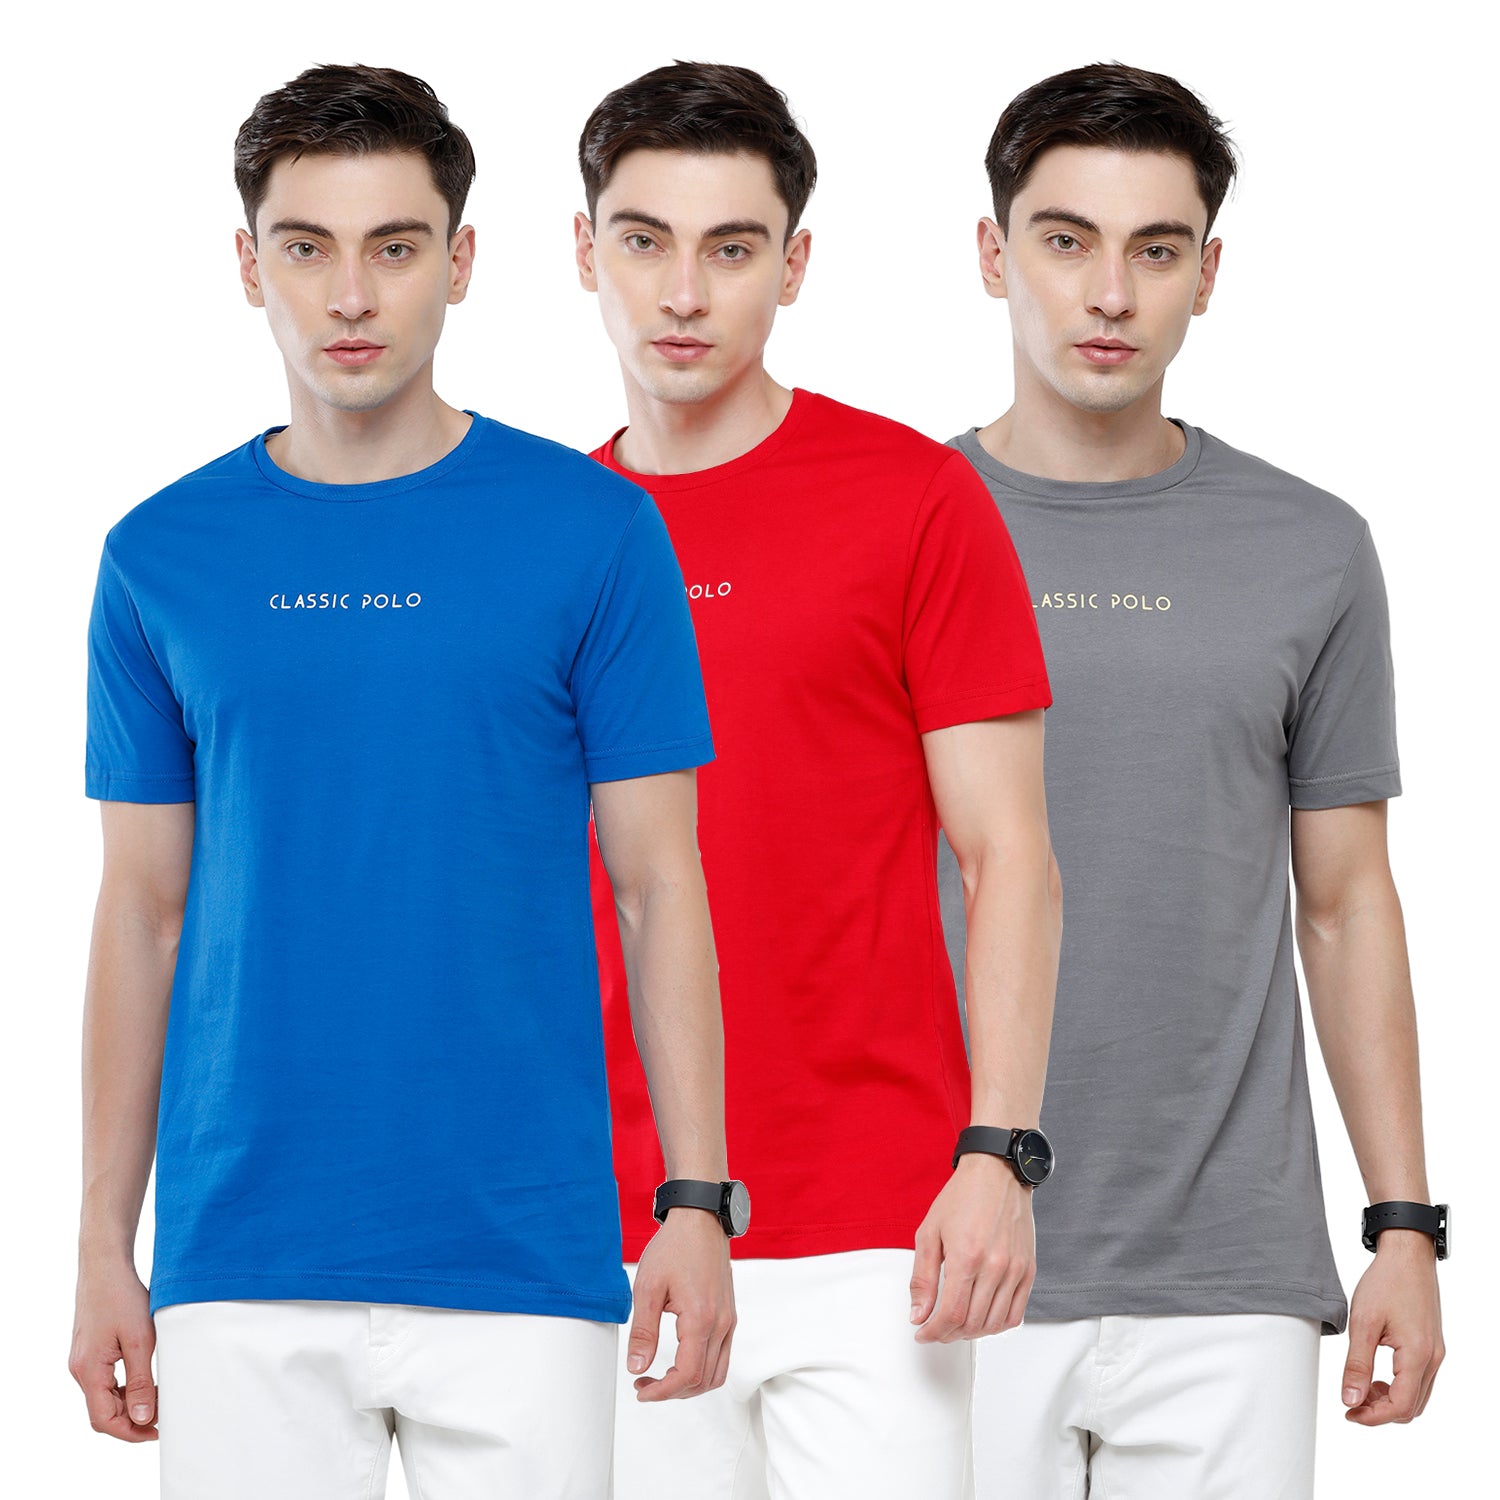 Classic polo Men's Basic Solid Single Jersey Crew Half Sleeve Slim Fit T-Shirt ( Trio Pack) - Ceres - 04 Classic Polo 